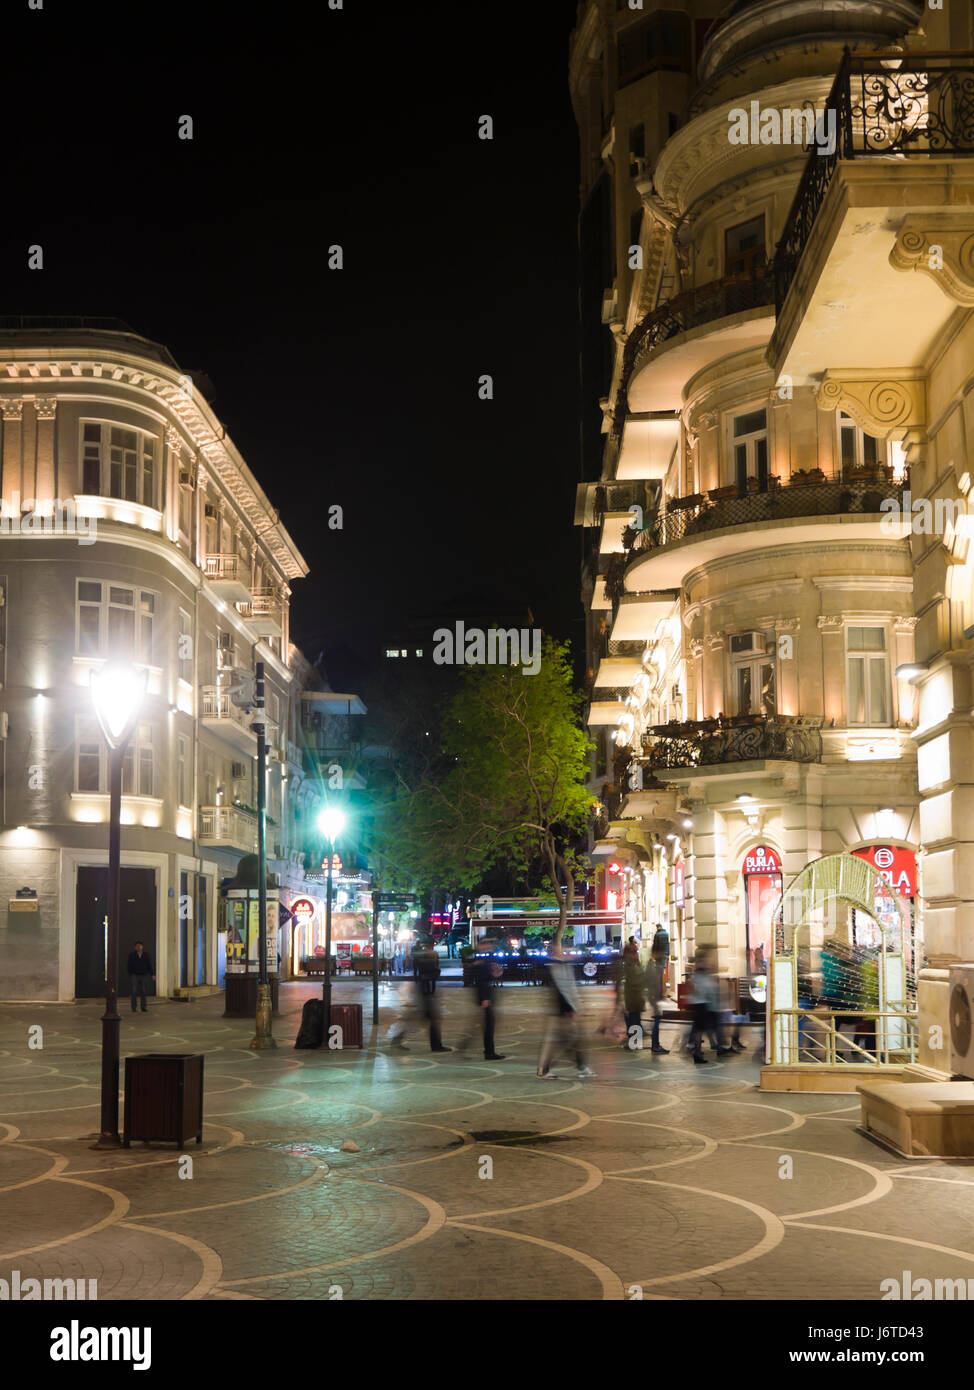 Night-time view of people and buildings in and around Nizami street, a shopping and pedestrian area in central Baku Azerbaijan Stock Photo